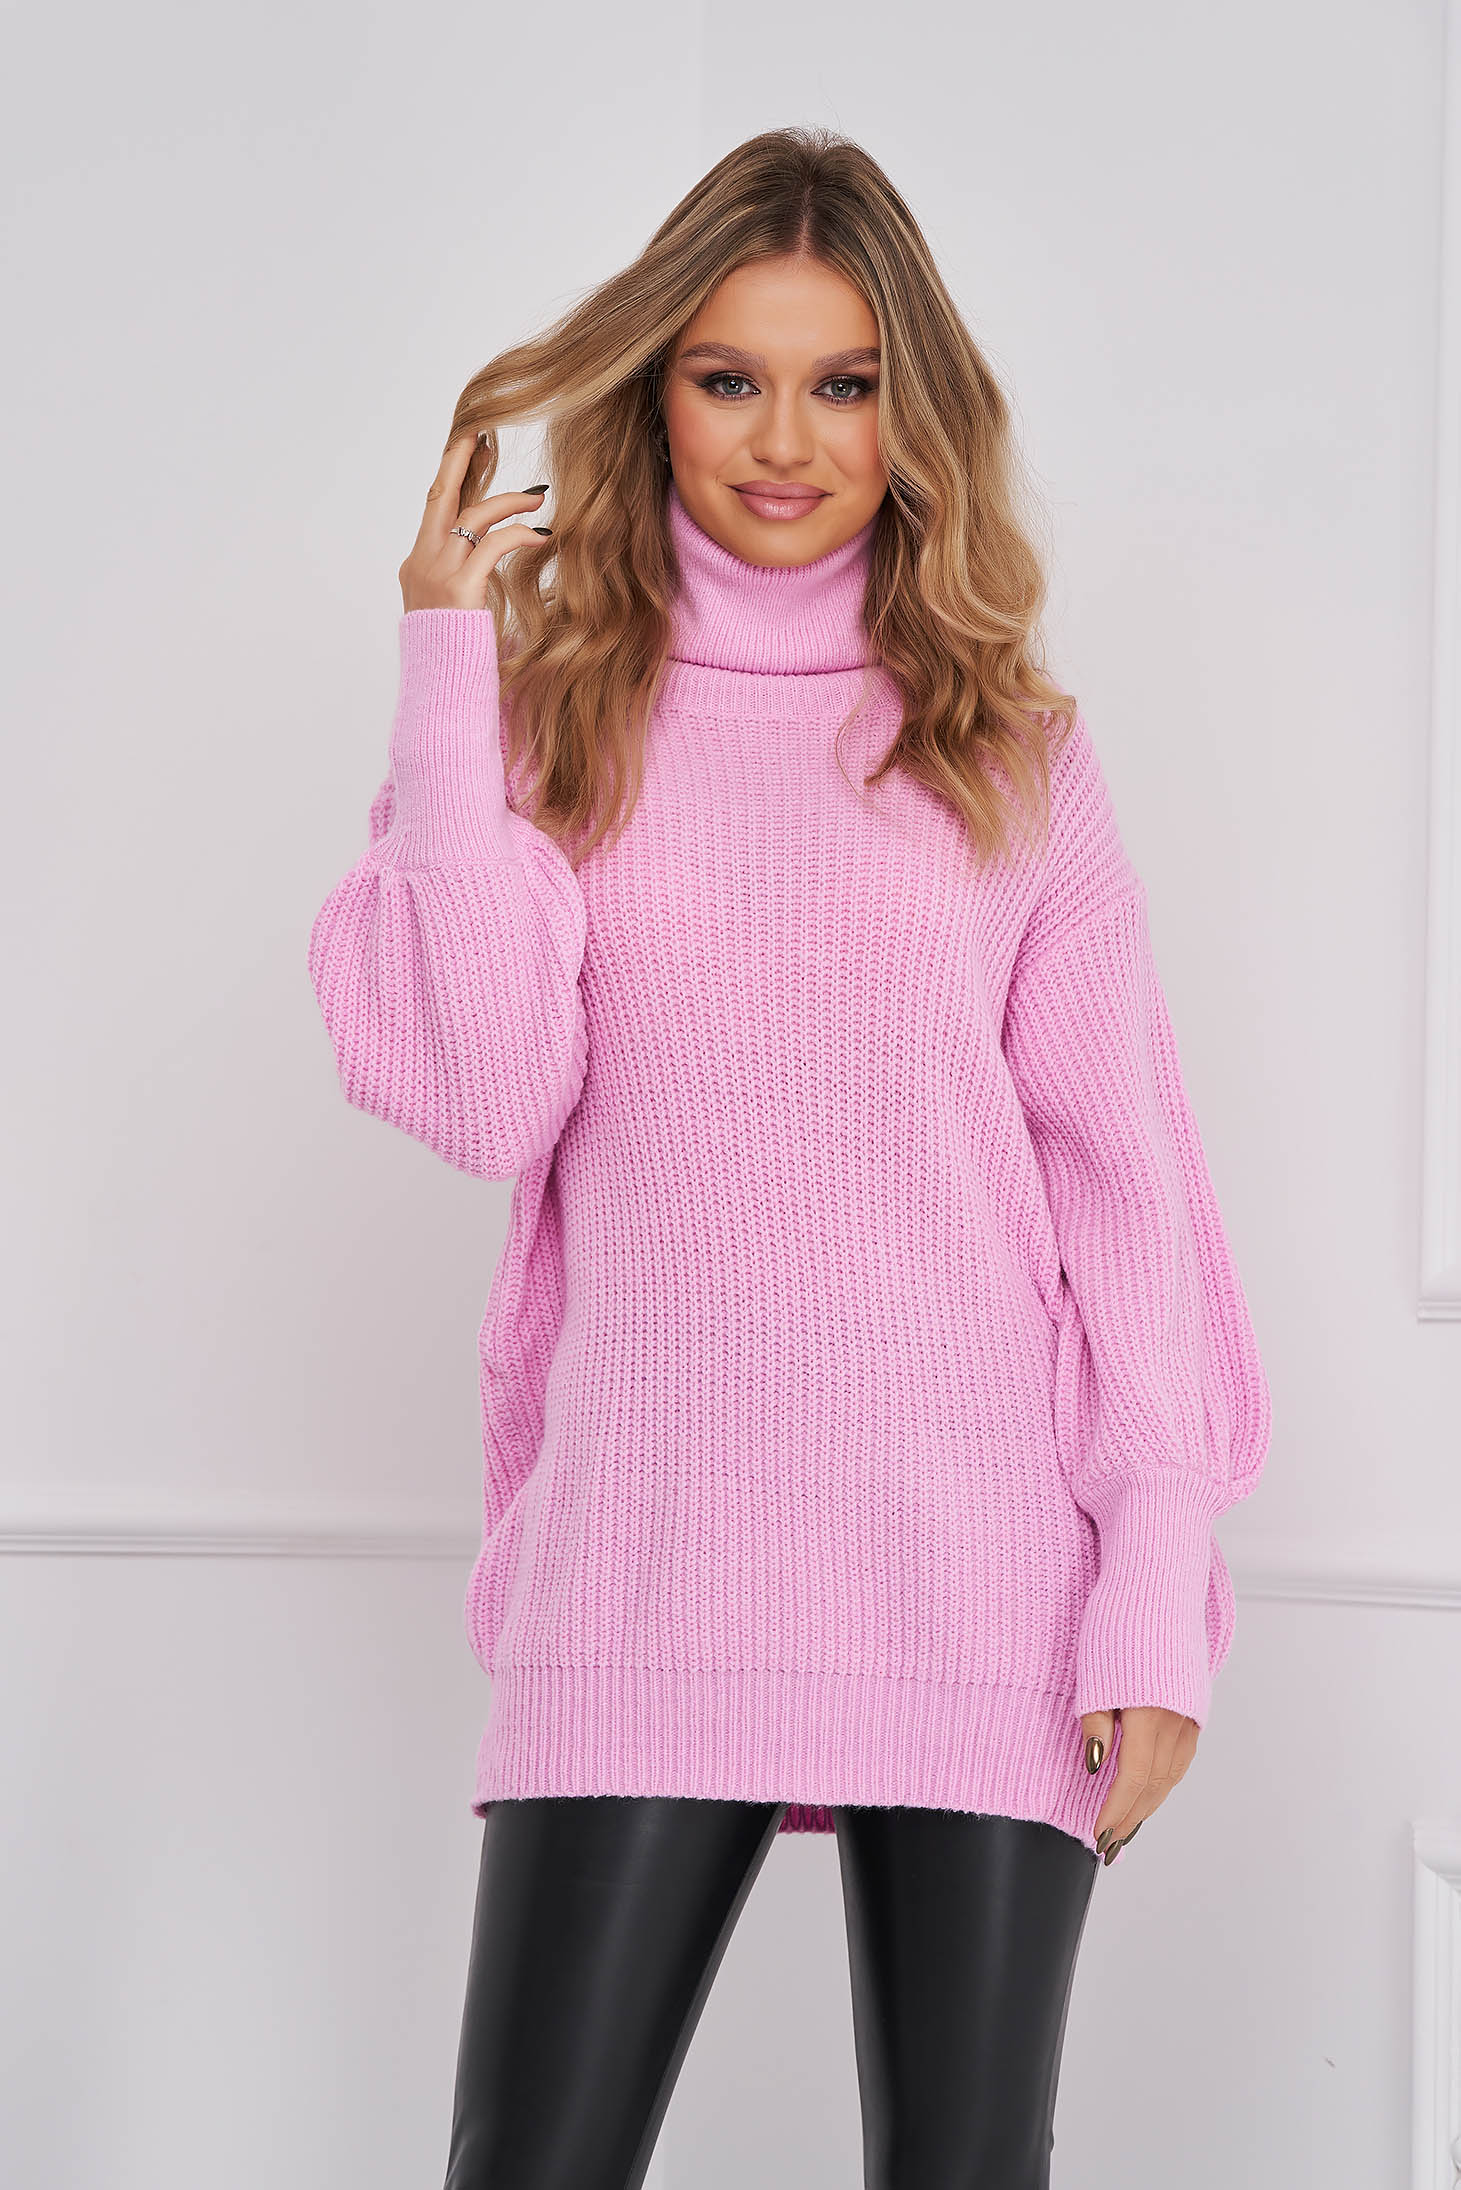 Lightpink sweater knitted loose fit high collar